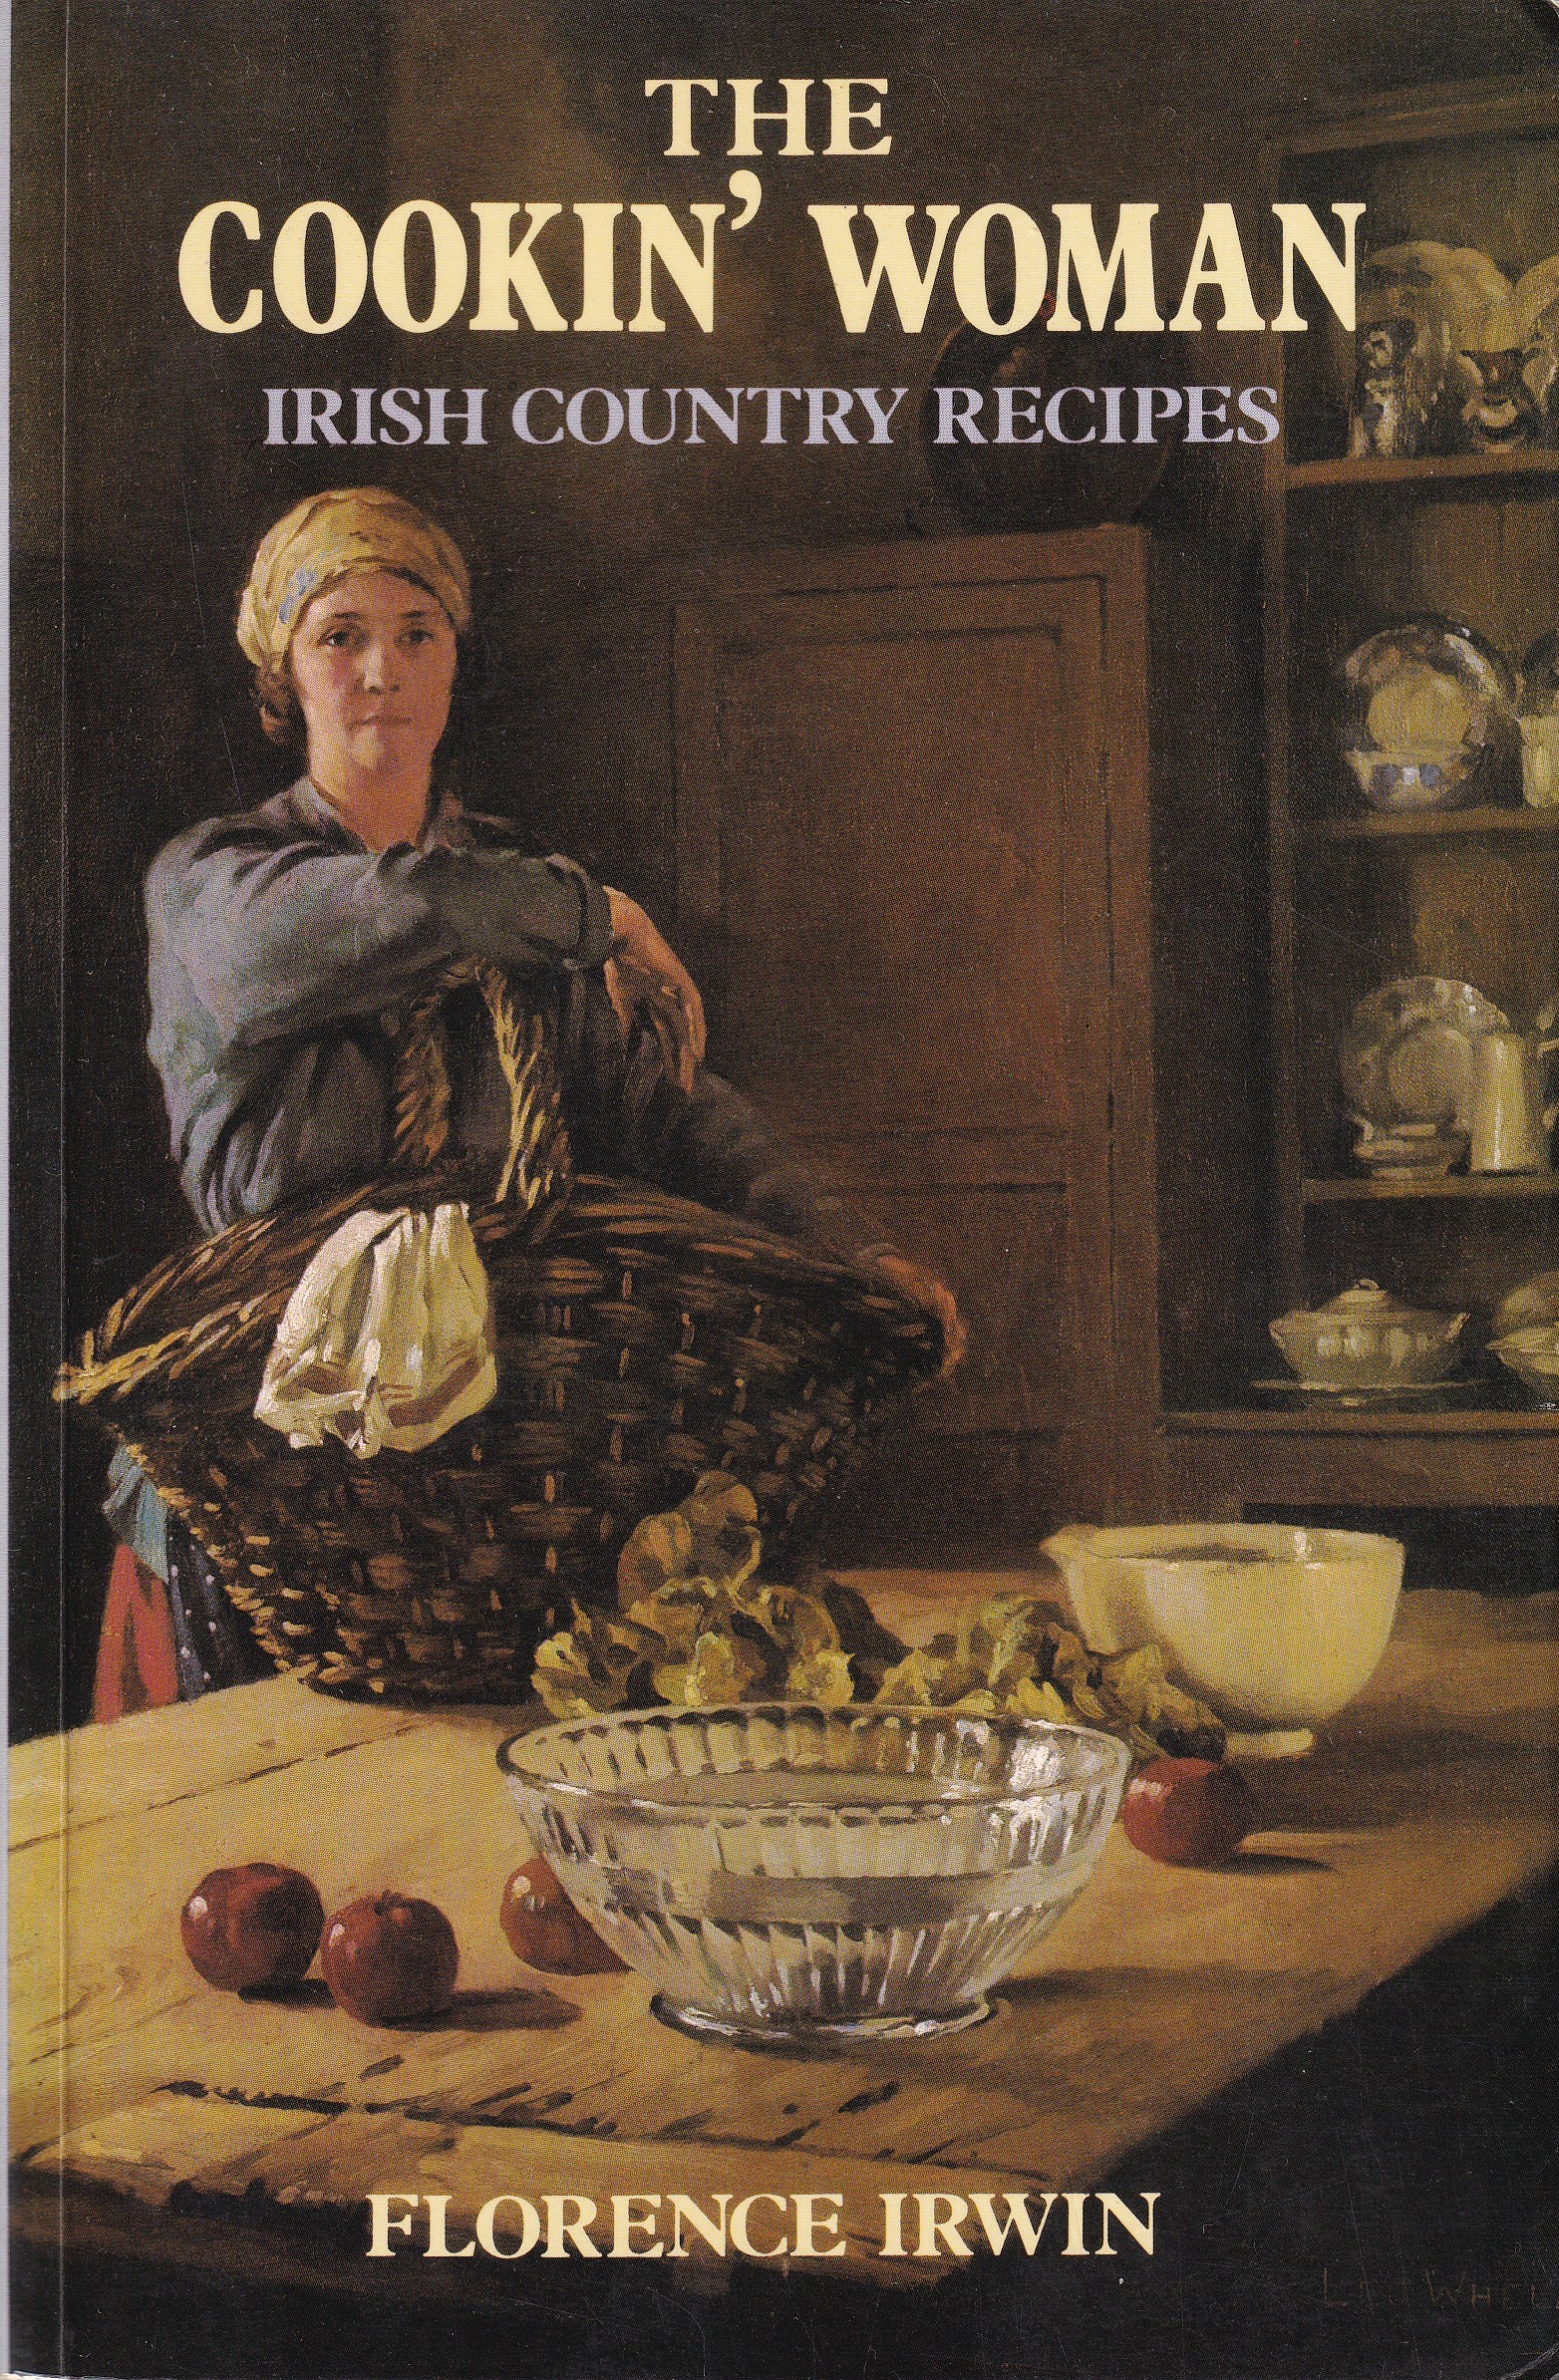 The Cookin’ Woman: Irish Country Recipes | Florence Irwin | Charlie Byrne's